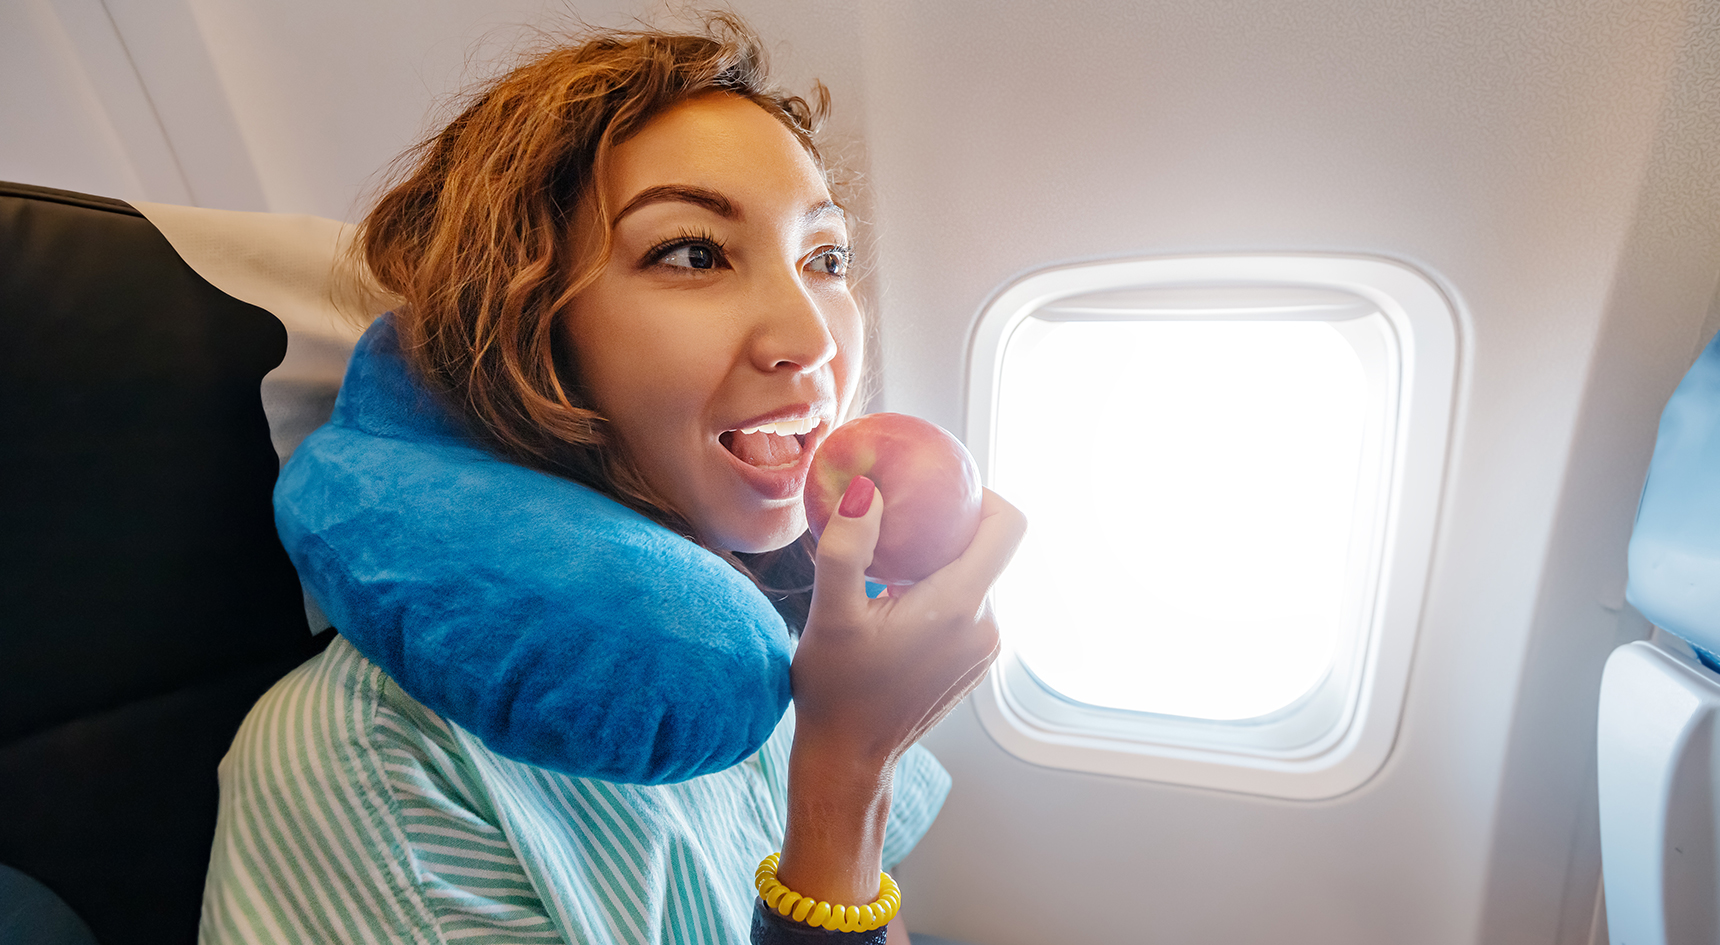 Woman eating an apple during a flight.